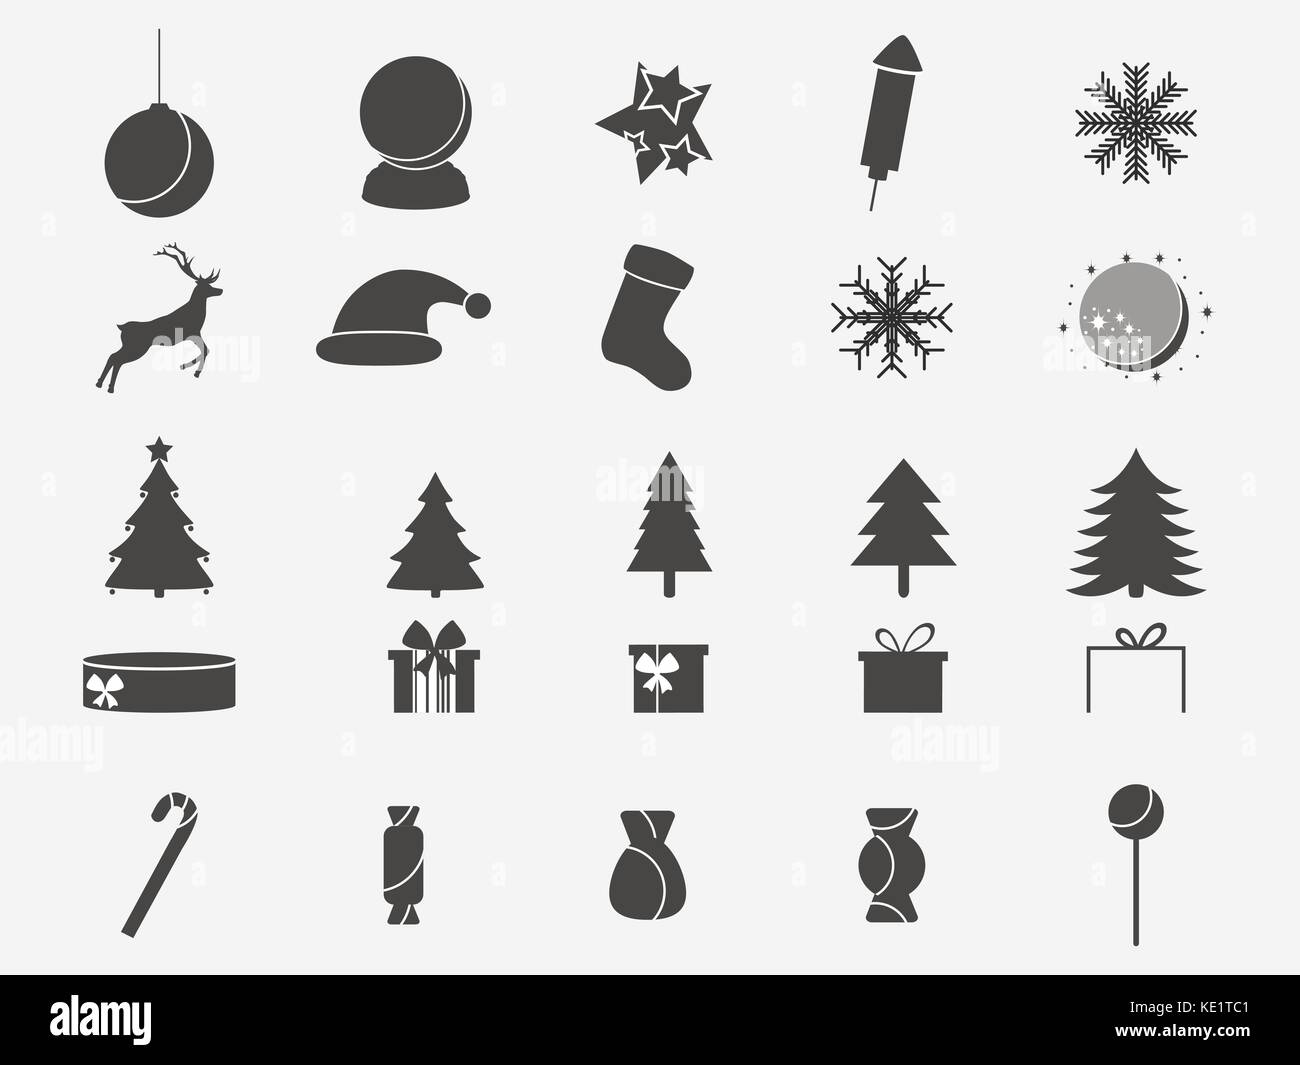 Christmas icon set. Collection of holiday symbols. Vector illustration ...